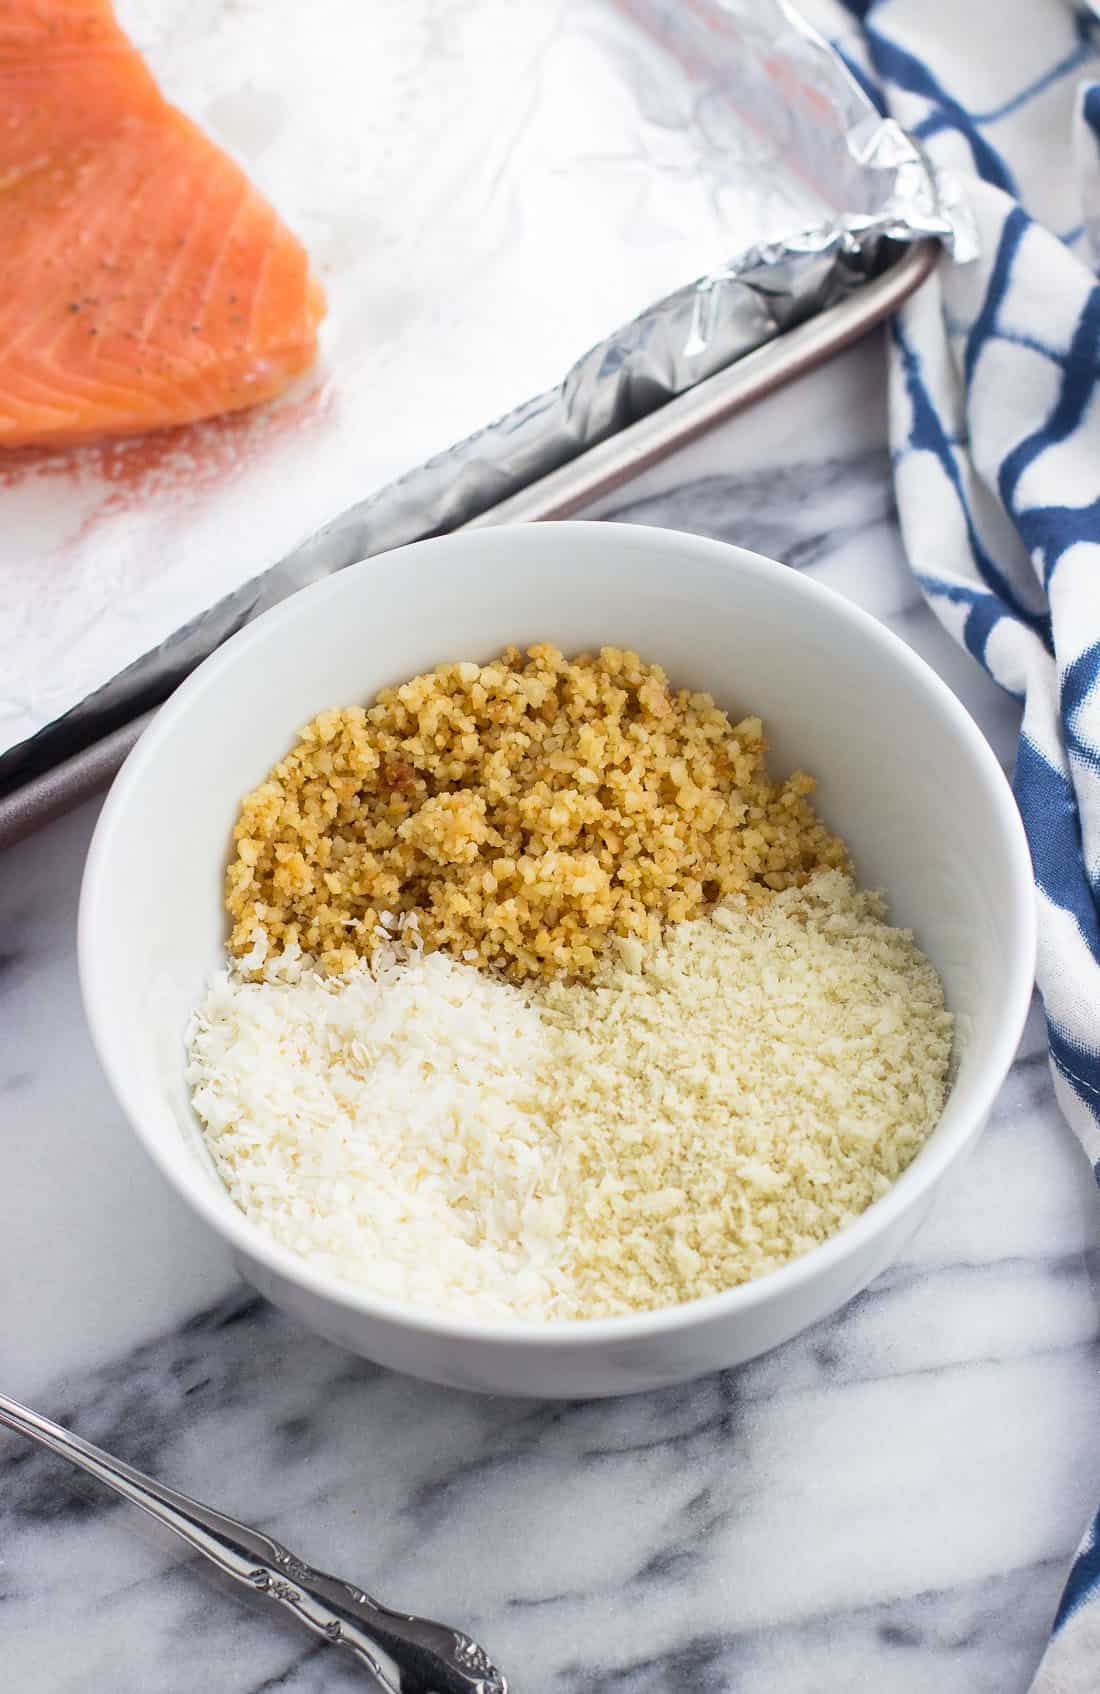 Ground macadamia nuts, unsweetened coconut flakes, and panko breadcrumbs in a bowl